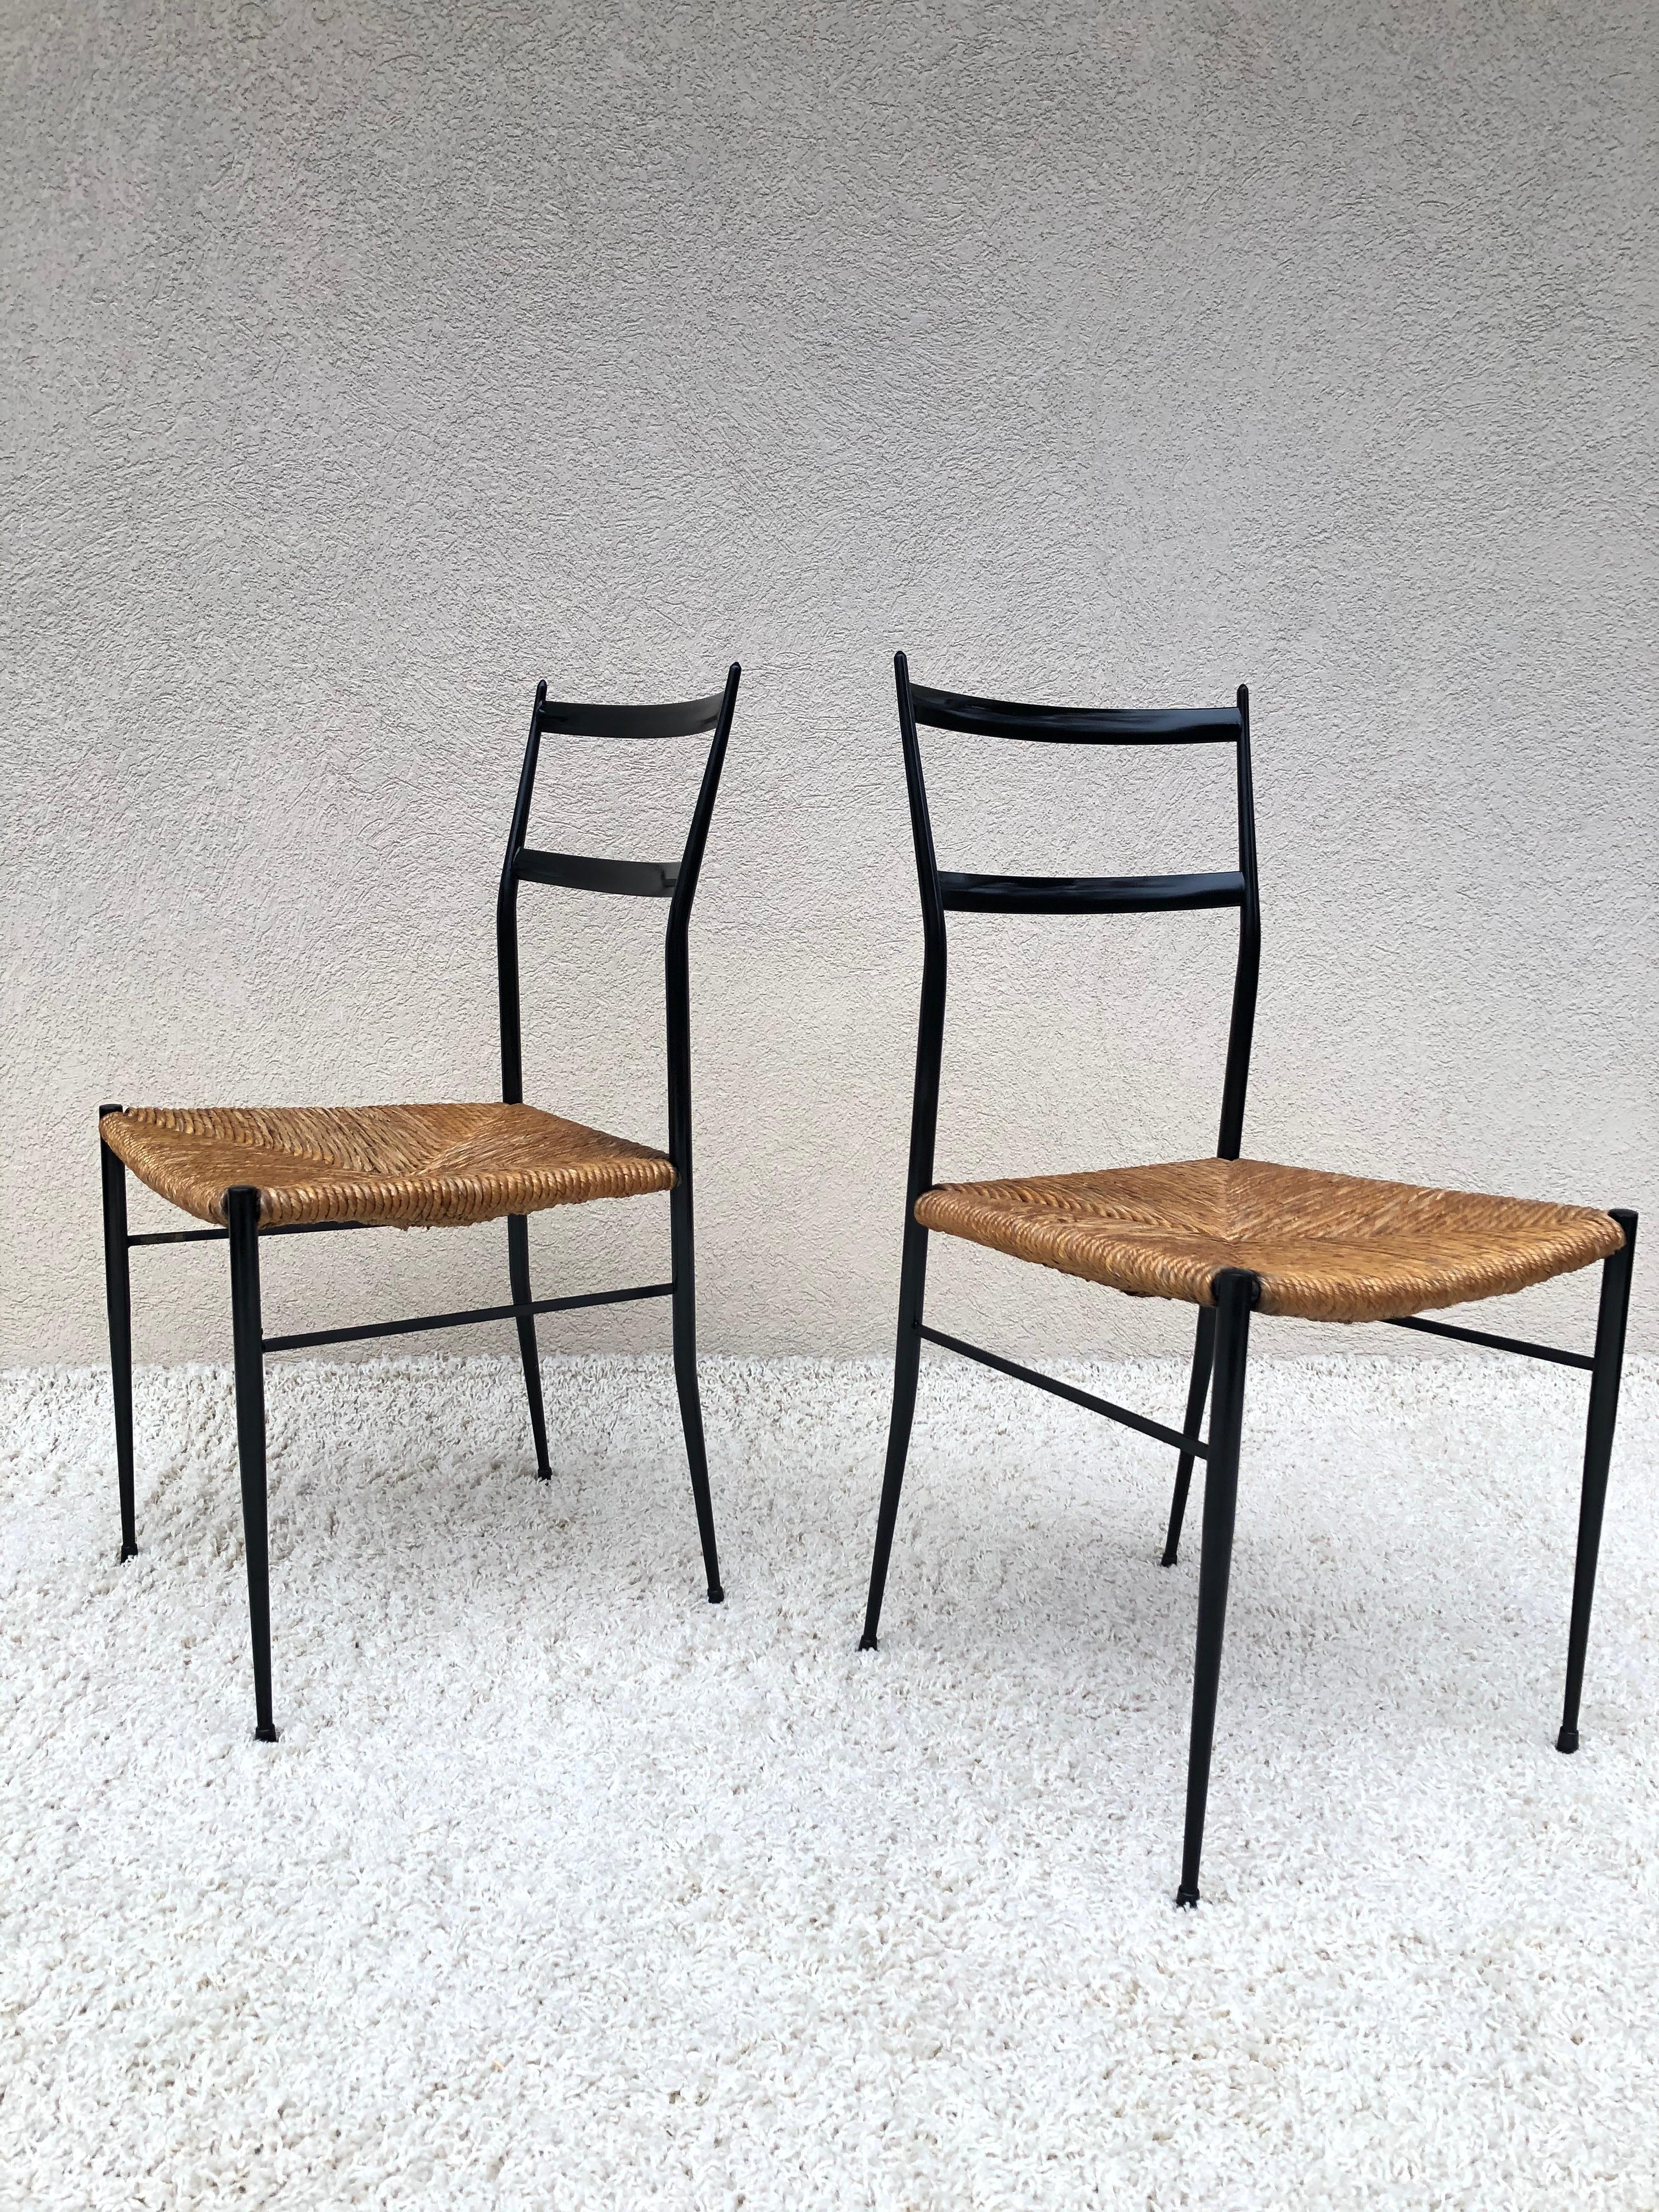 Pair of Superlegga inspired chairs, in the style of Gio Ponti, circa 1960. The original design was made for a project in Eindhoven, where Gio Ponti designed the outside of the building, chairs are metal with authentic original woven straw seats.